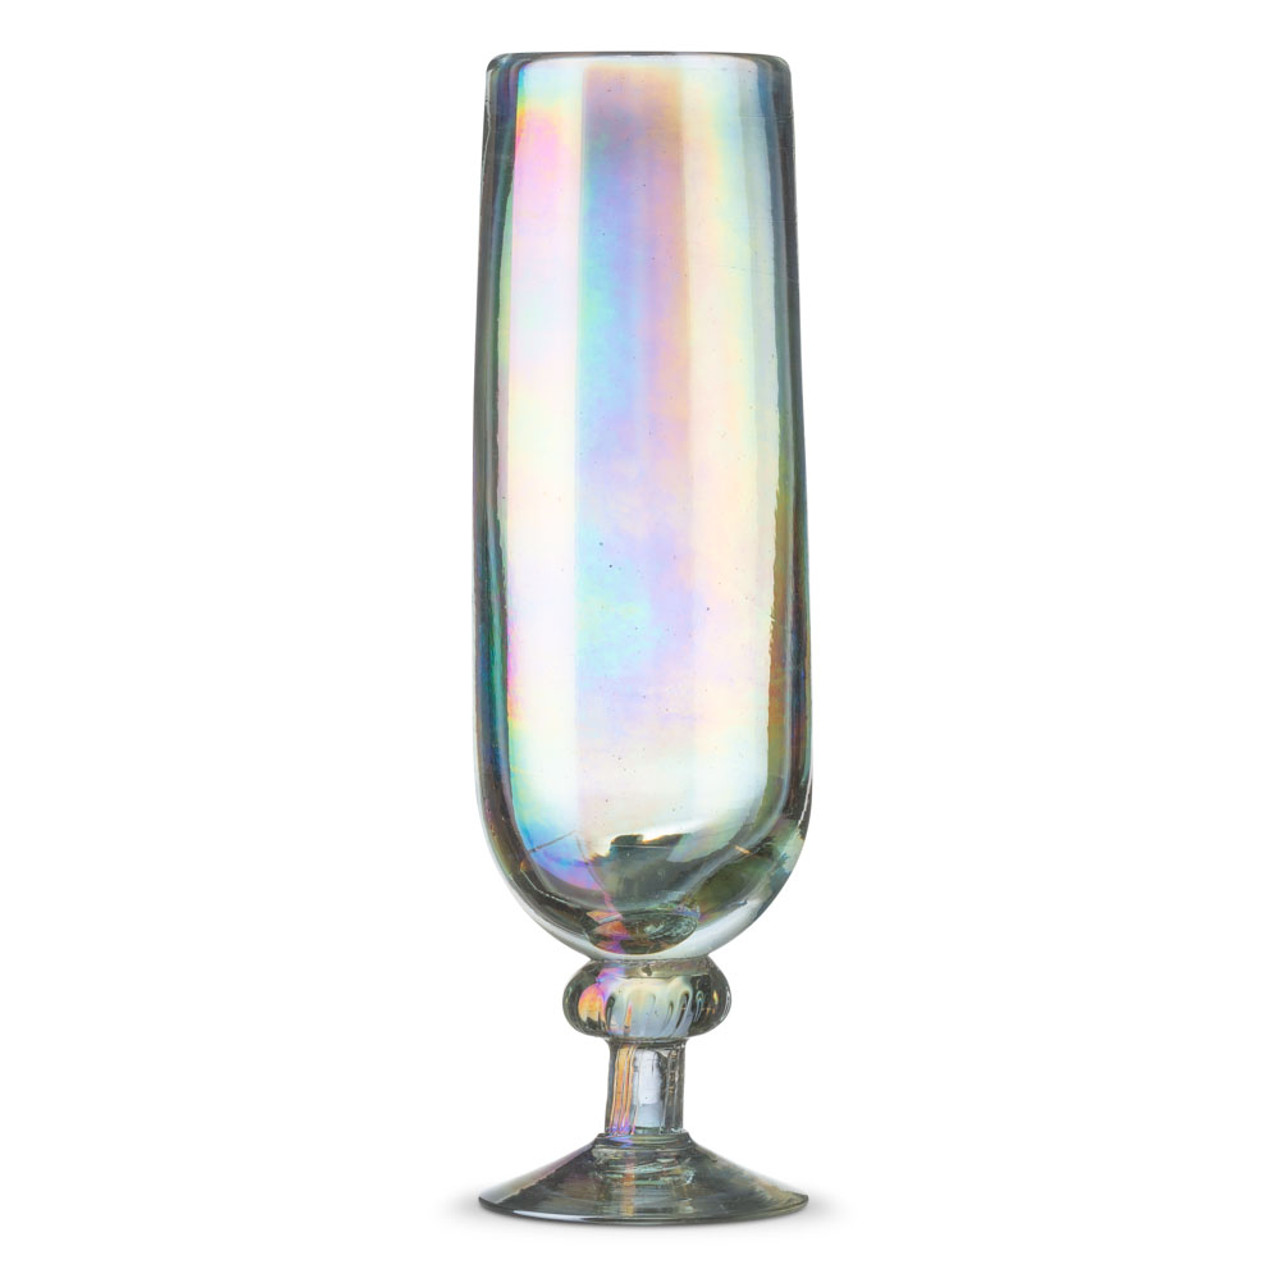 https://cdn11.bigcommerce.com/s-cznxq08r7/images/stencil/1280x1280/products/4775/13179/A10067-1-Hand-Blown-Fluted-Pearl-Champagne-and-Mimosa-Glasses-6-oz-Set-of-2-1__32571.1612823326.jpg?c=1